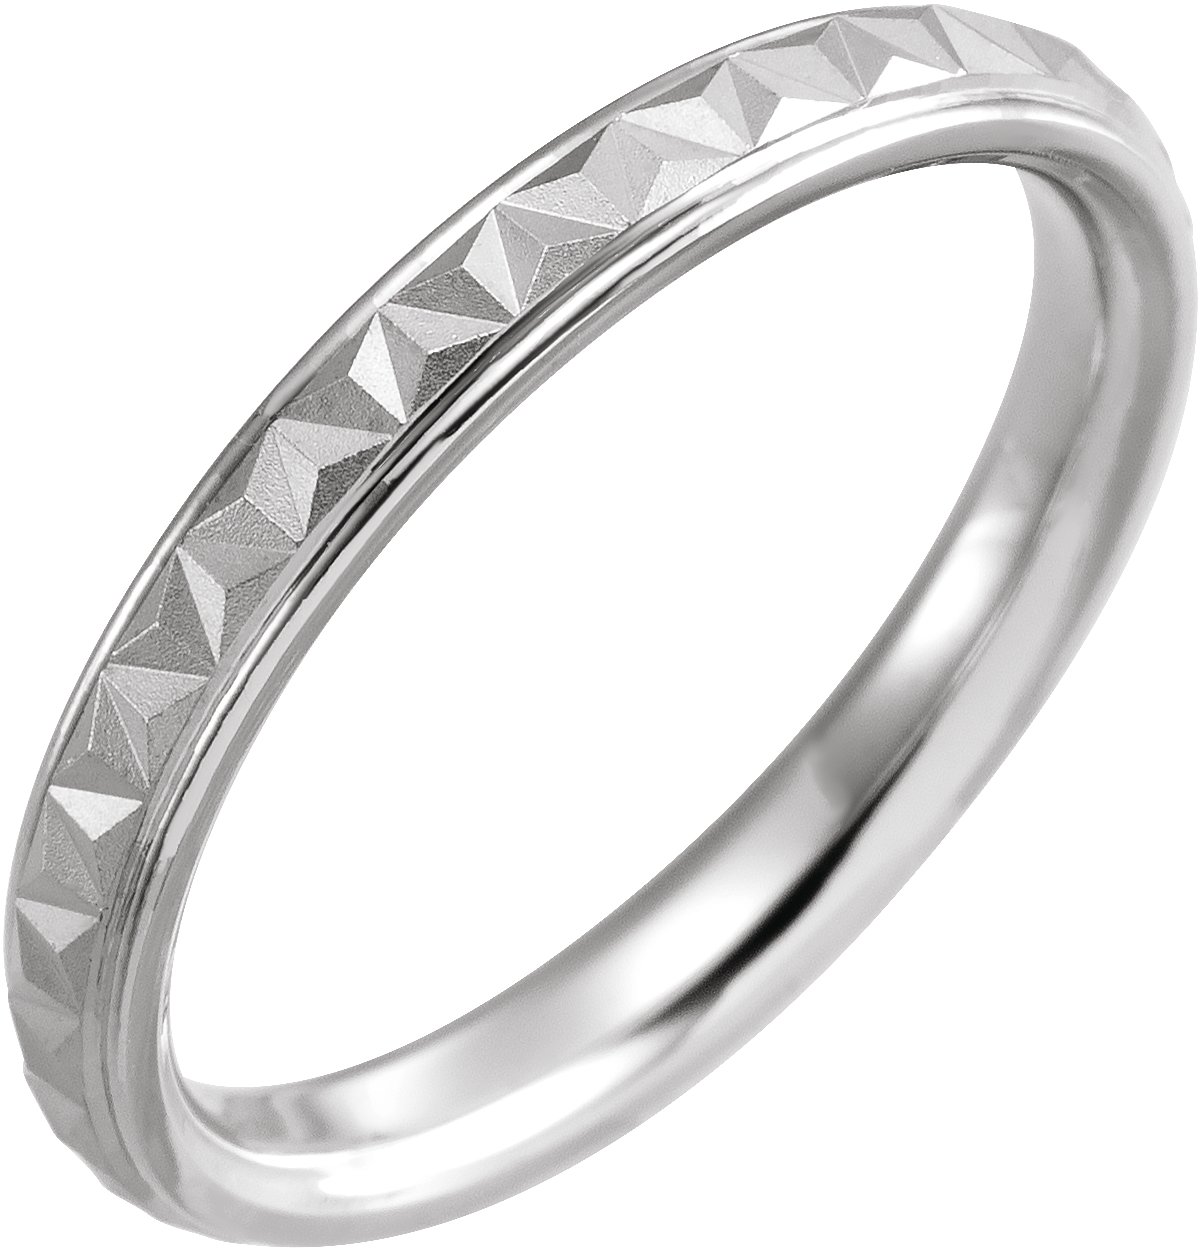 Sterling Silver 3 mm Geometric Band with Matte/Polished Finish Size 20